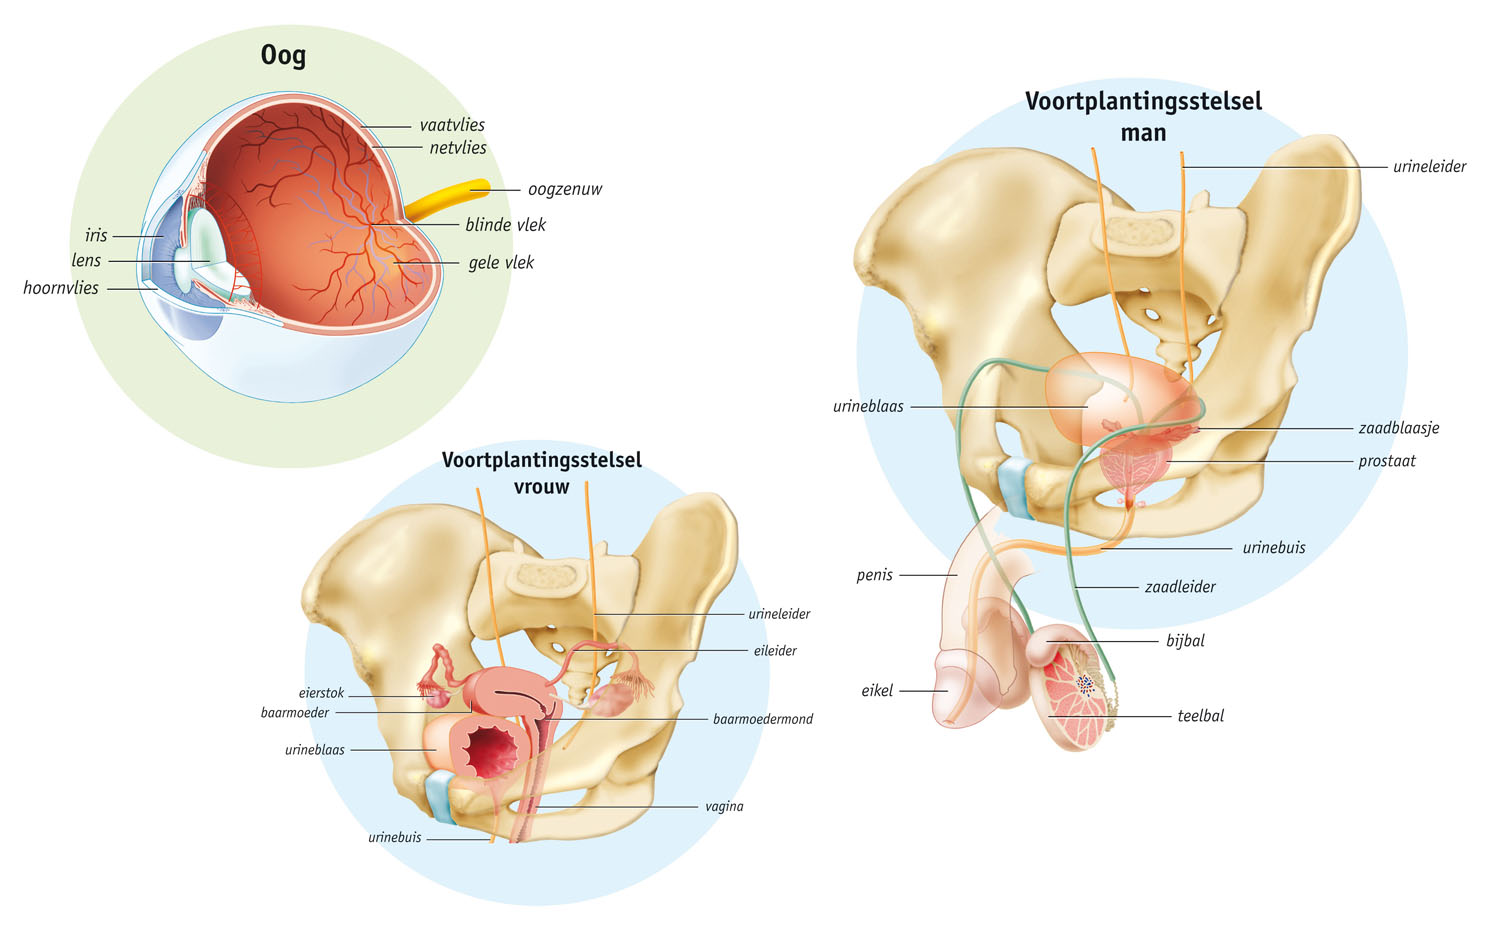 anatomical structures